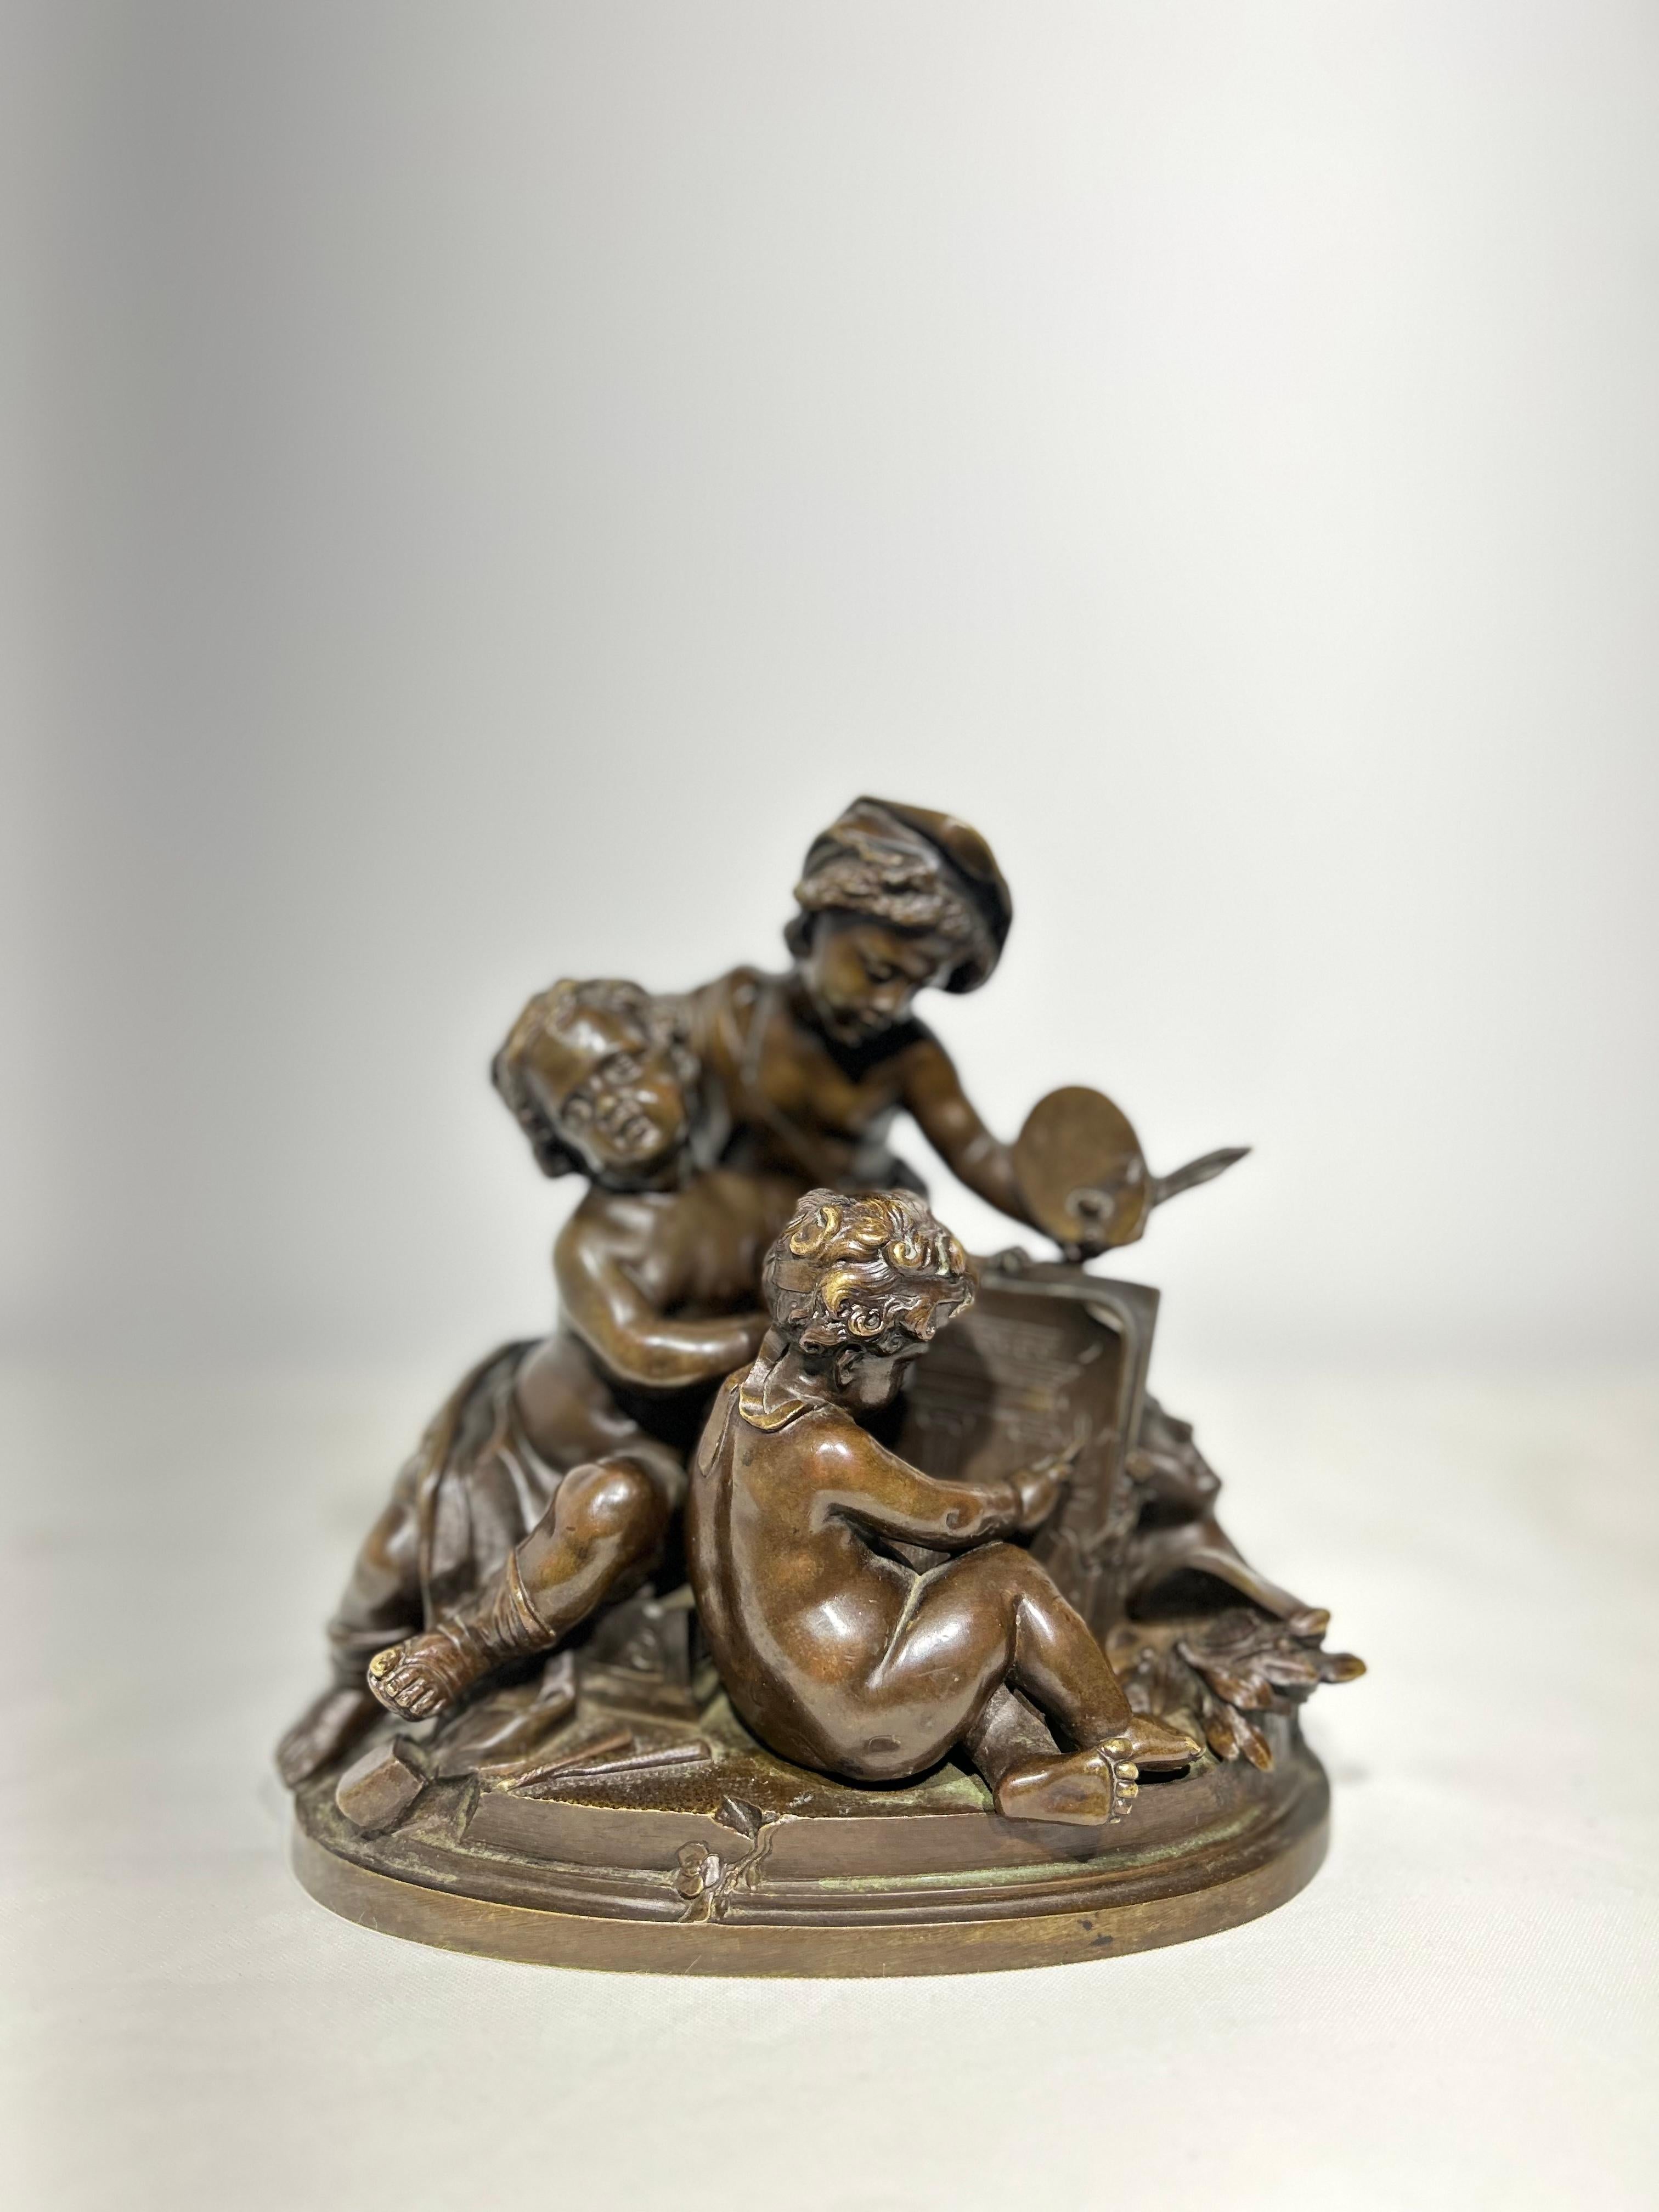 A beautifully refined bronze statue depicting an art scholar teaching two young cherubs. It has been finished with a patina for developing glossy sheen with age. Mounted on an oval bronzed base.